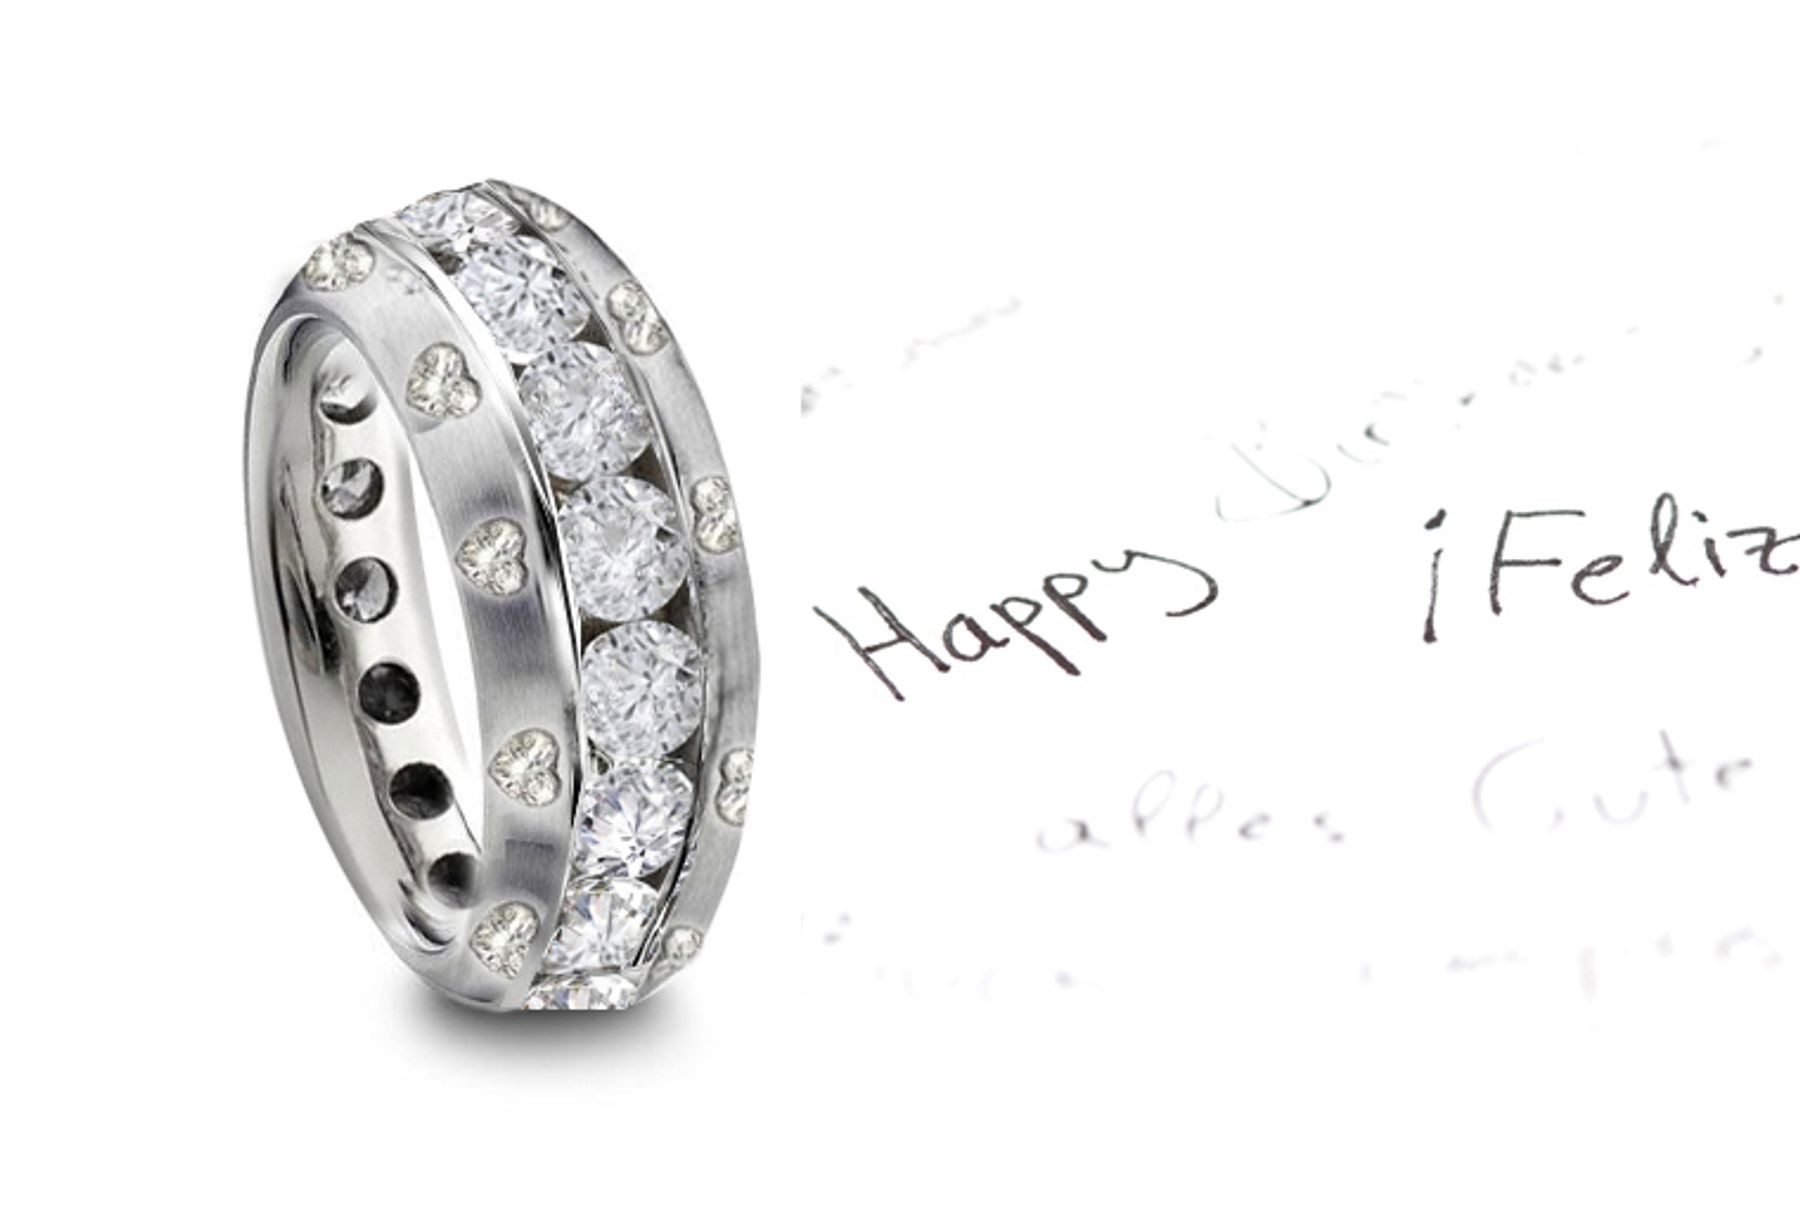 Style, Form & Grace:Platinum Diamond Eternity Band Adorned with Designs, Aanthus Leaf & Rocaille Engaved Motifs